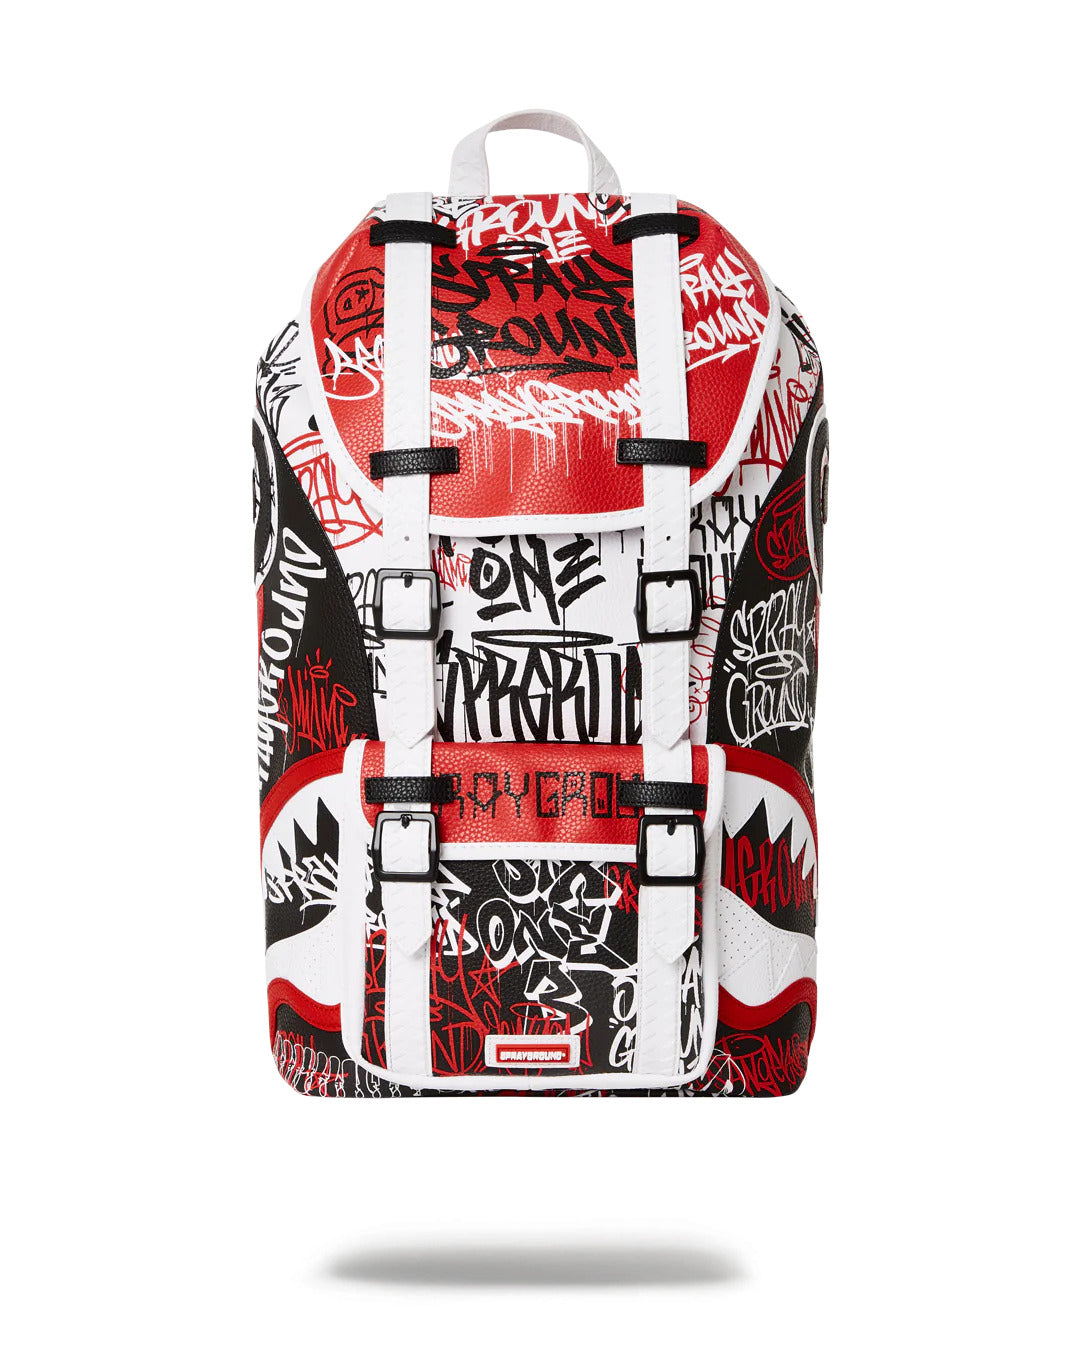 Sprayground Backpack in Red